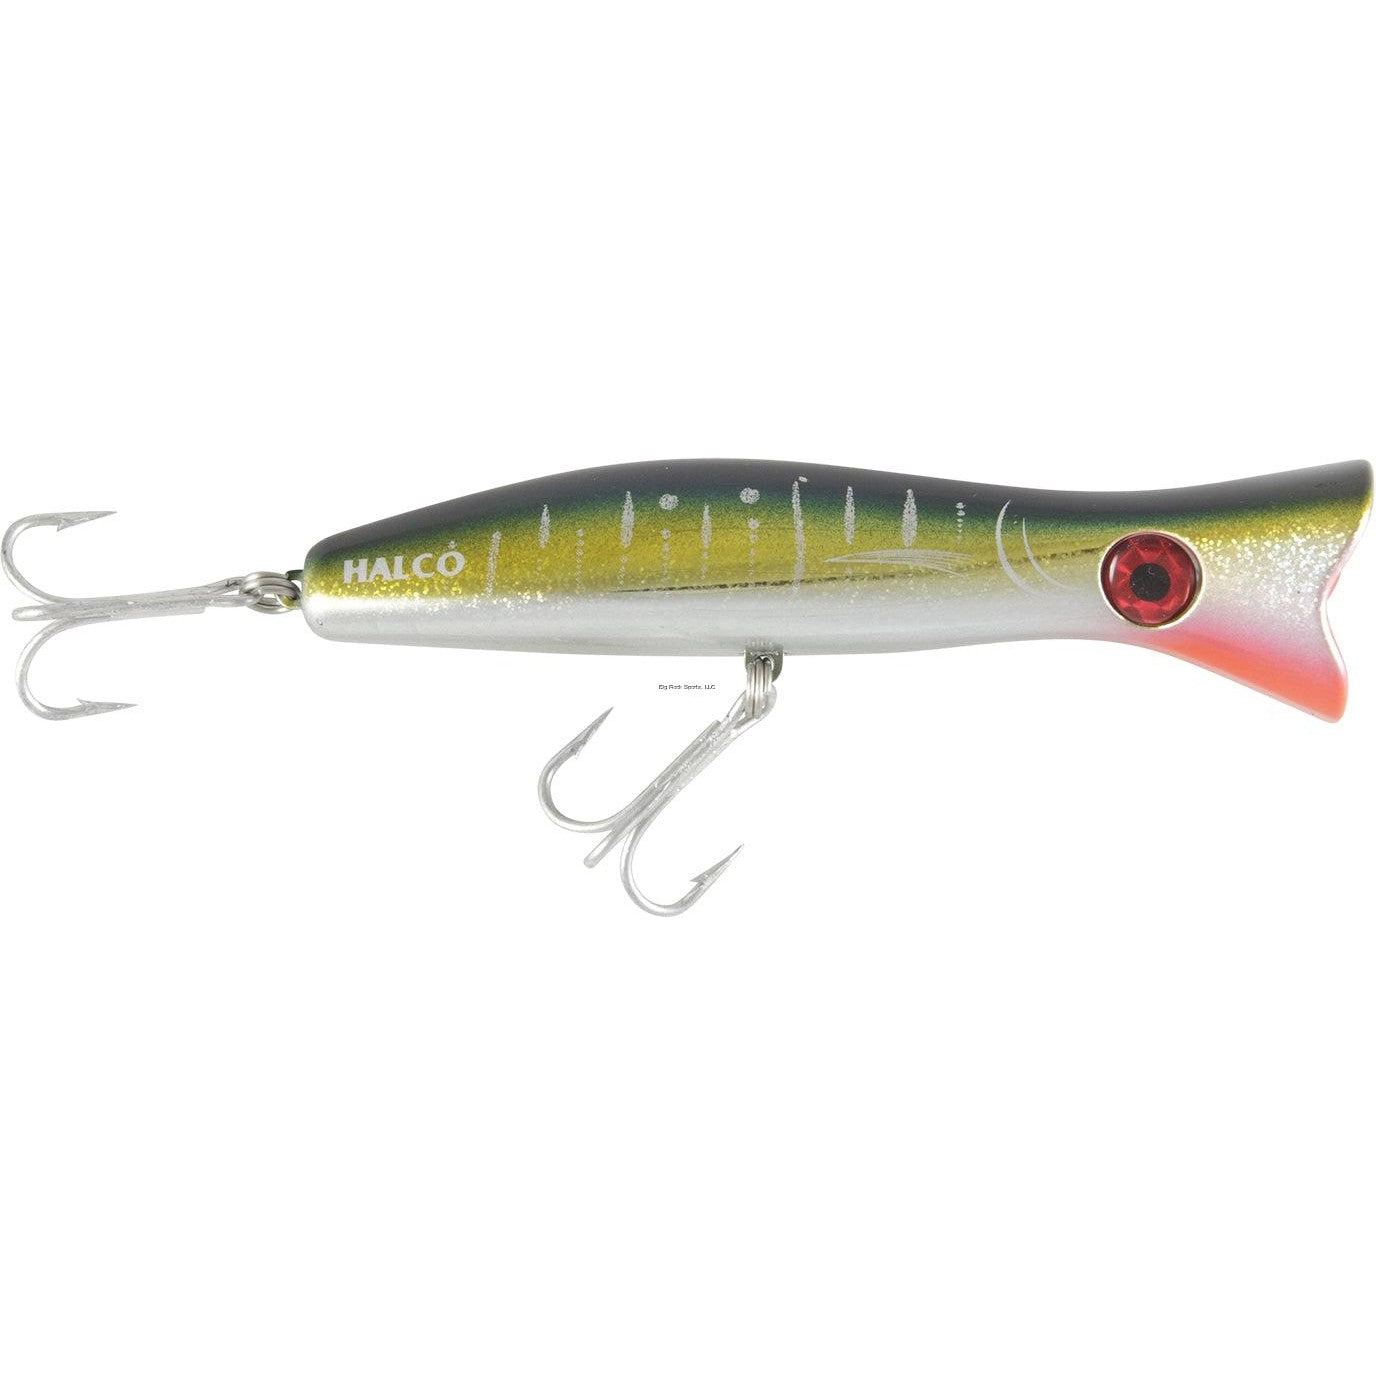  Halco Roosta Popper 160 Trolling Lure : Sports & Outdoors